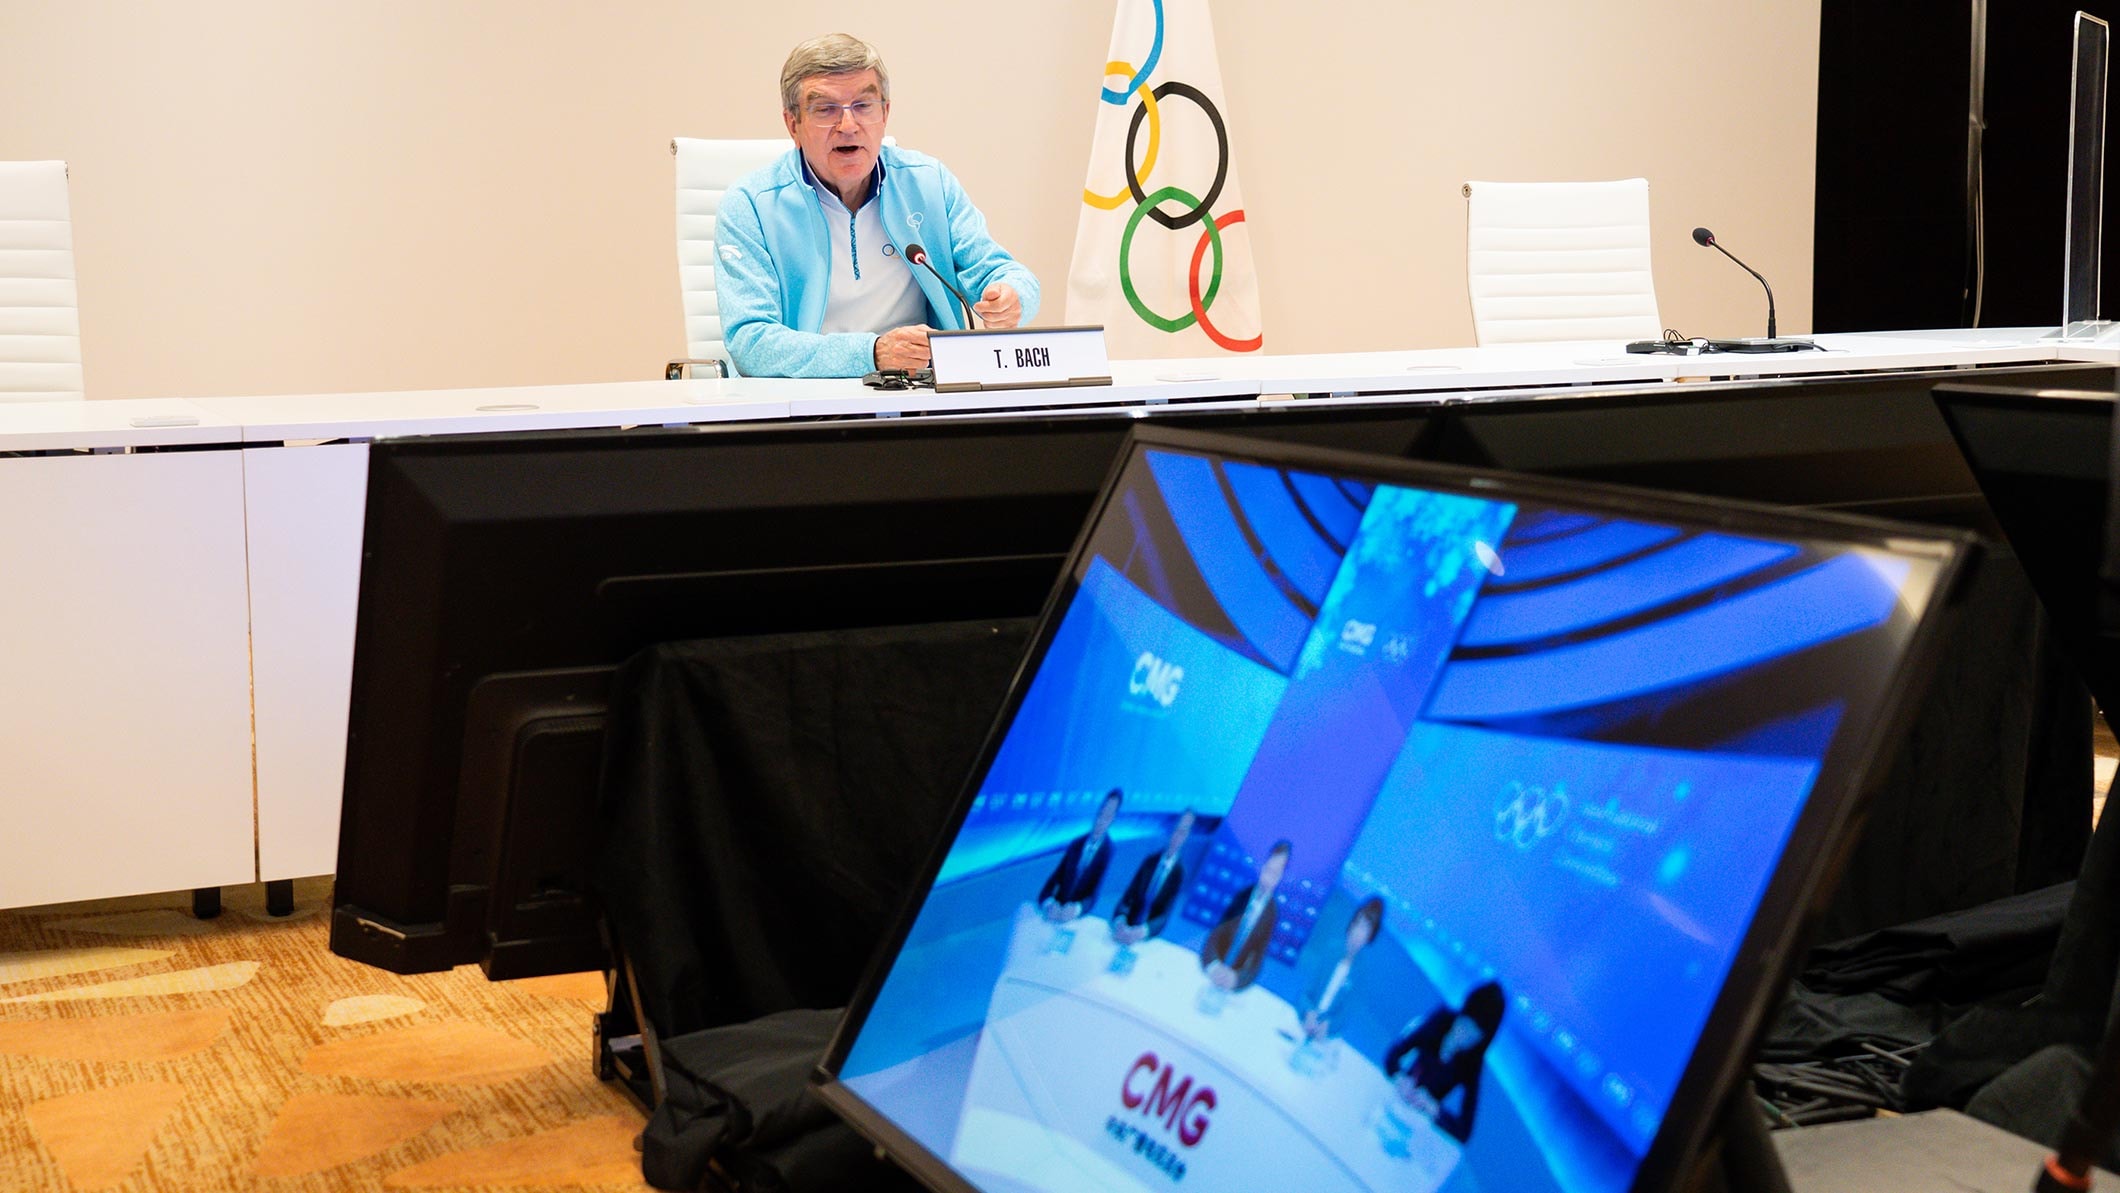 IOC President with CMG